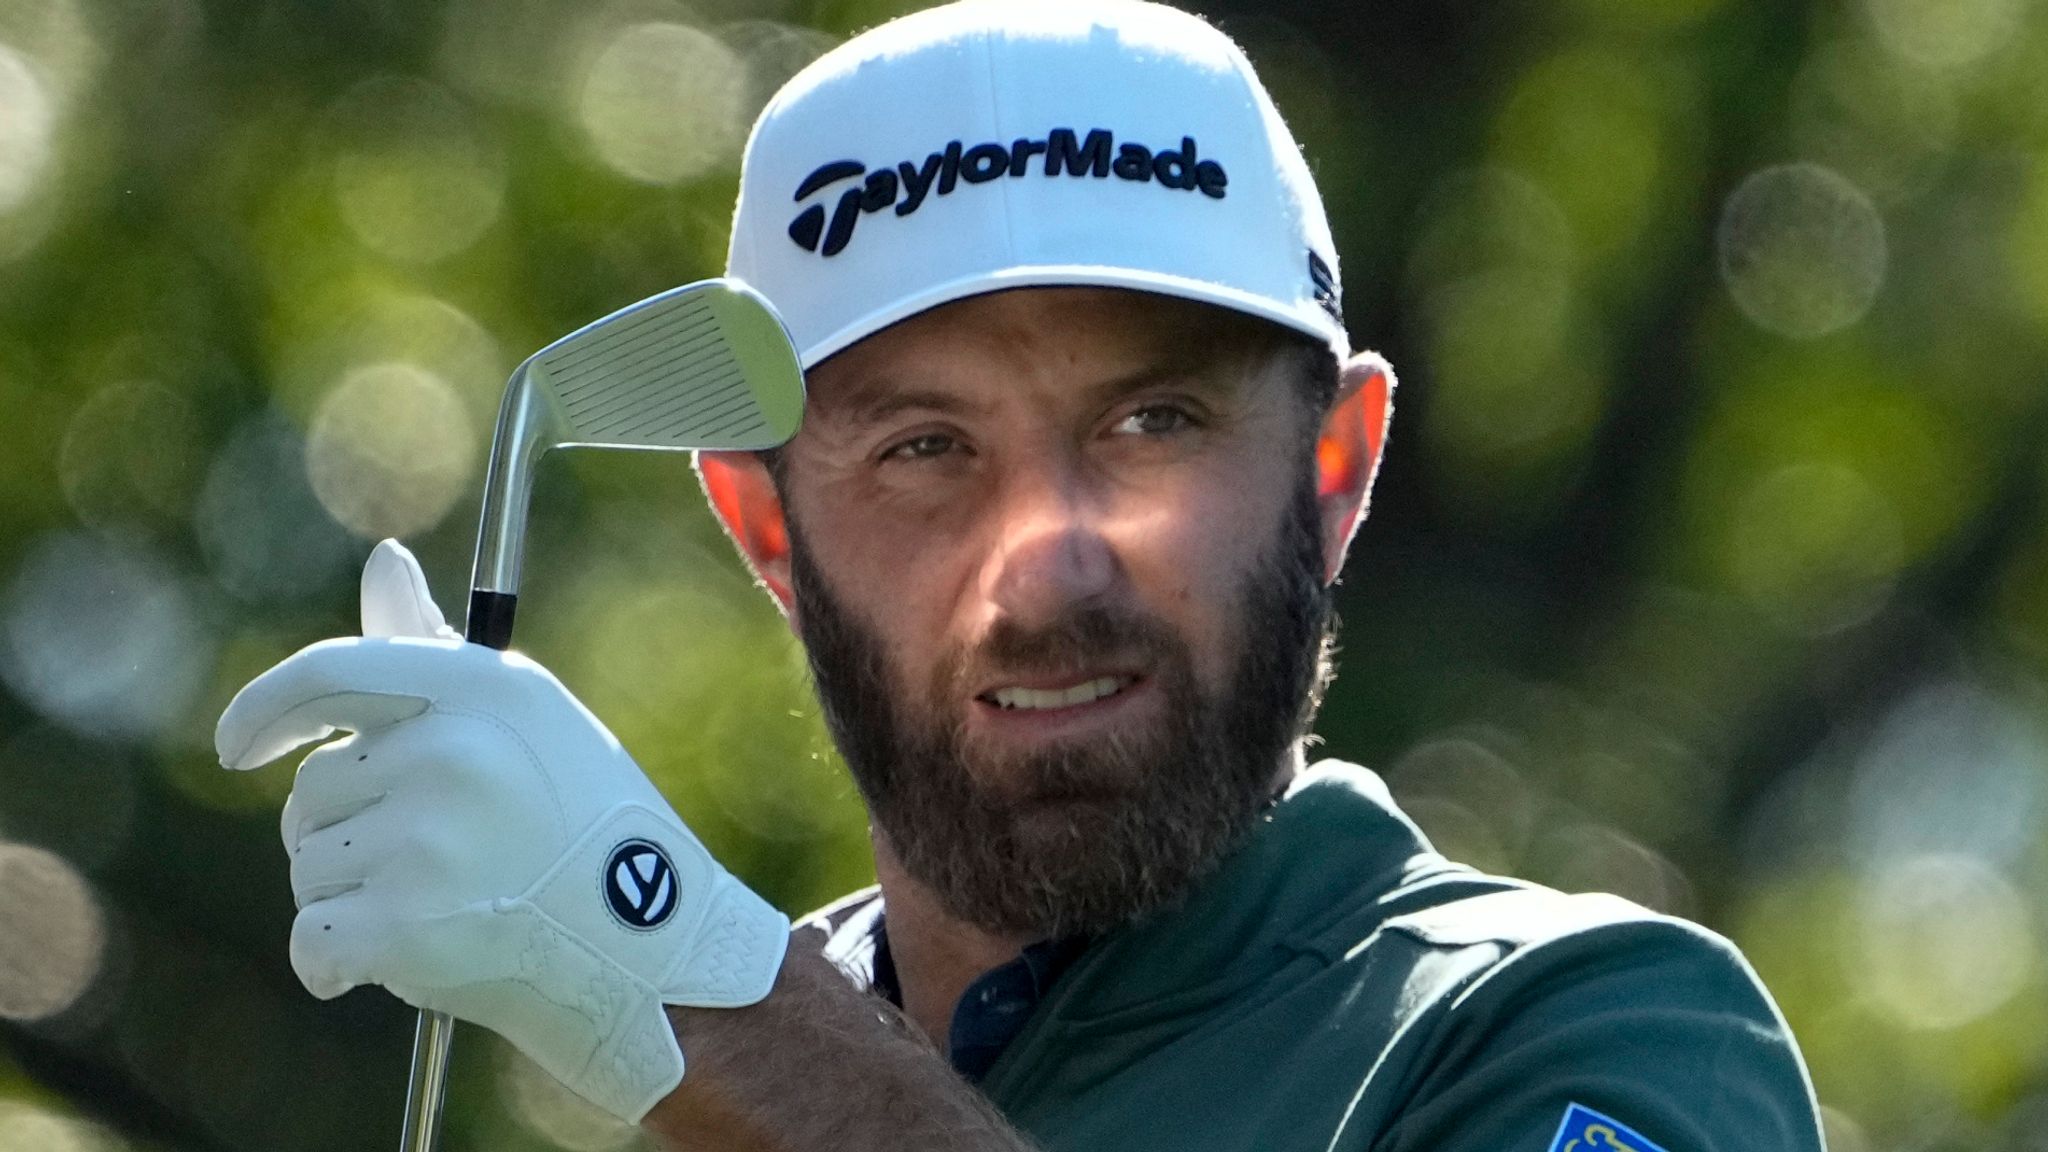 He's fit but he's not super tall” – Dustin Johnson when he watched Rory  McIlroy's drive